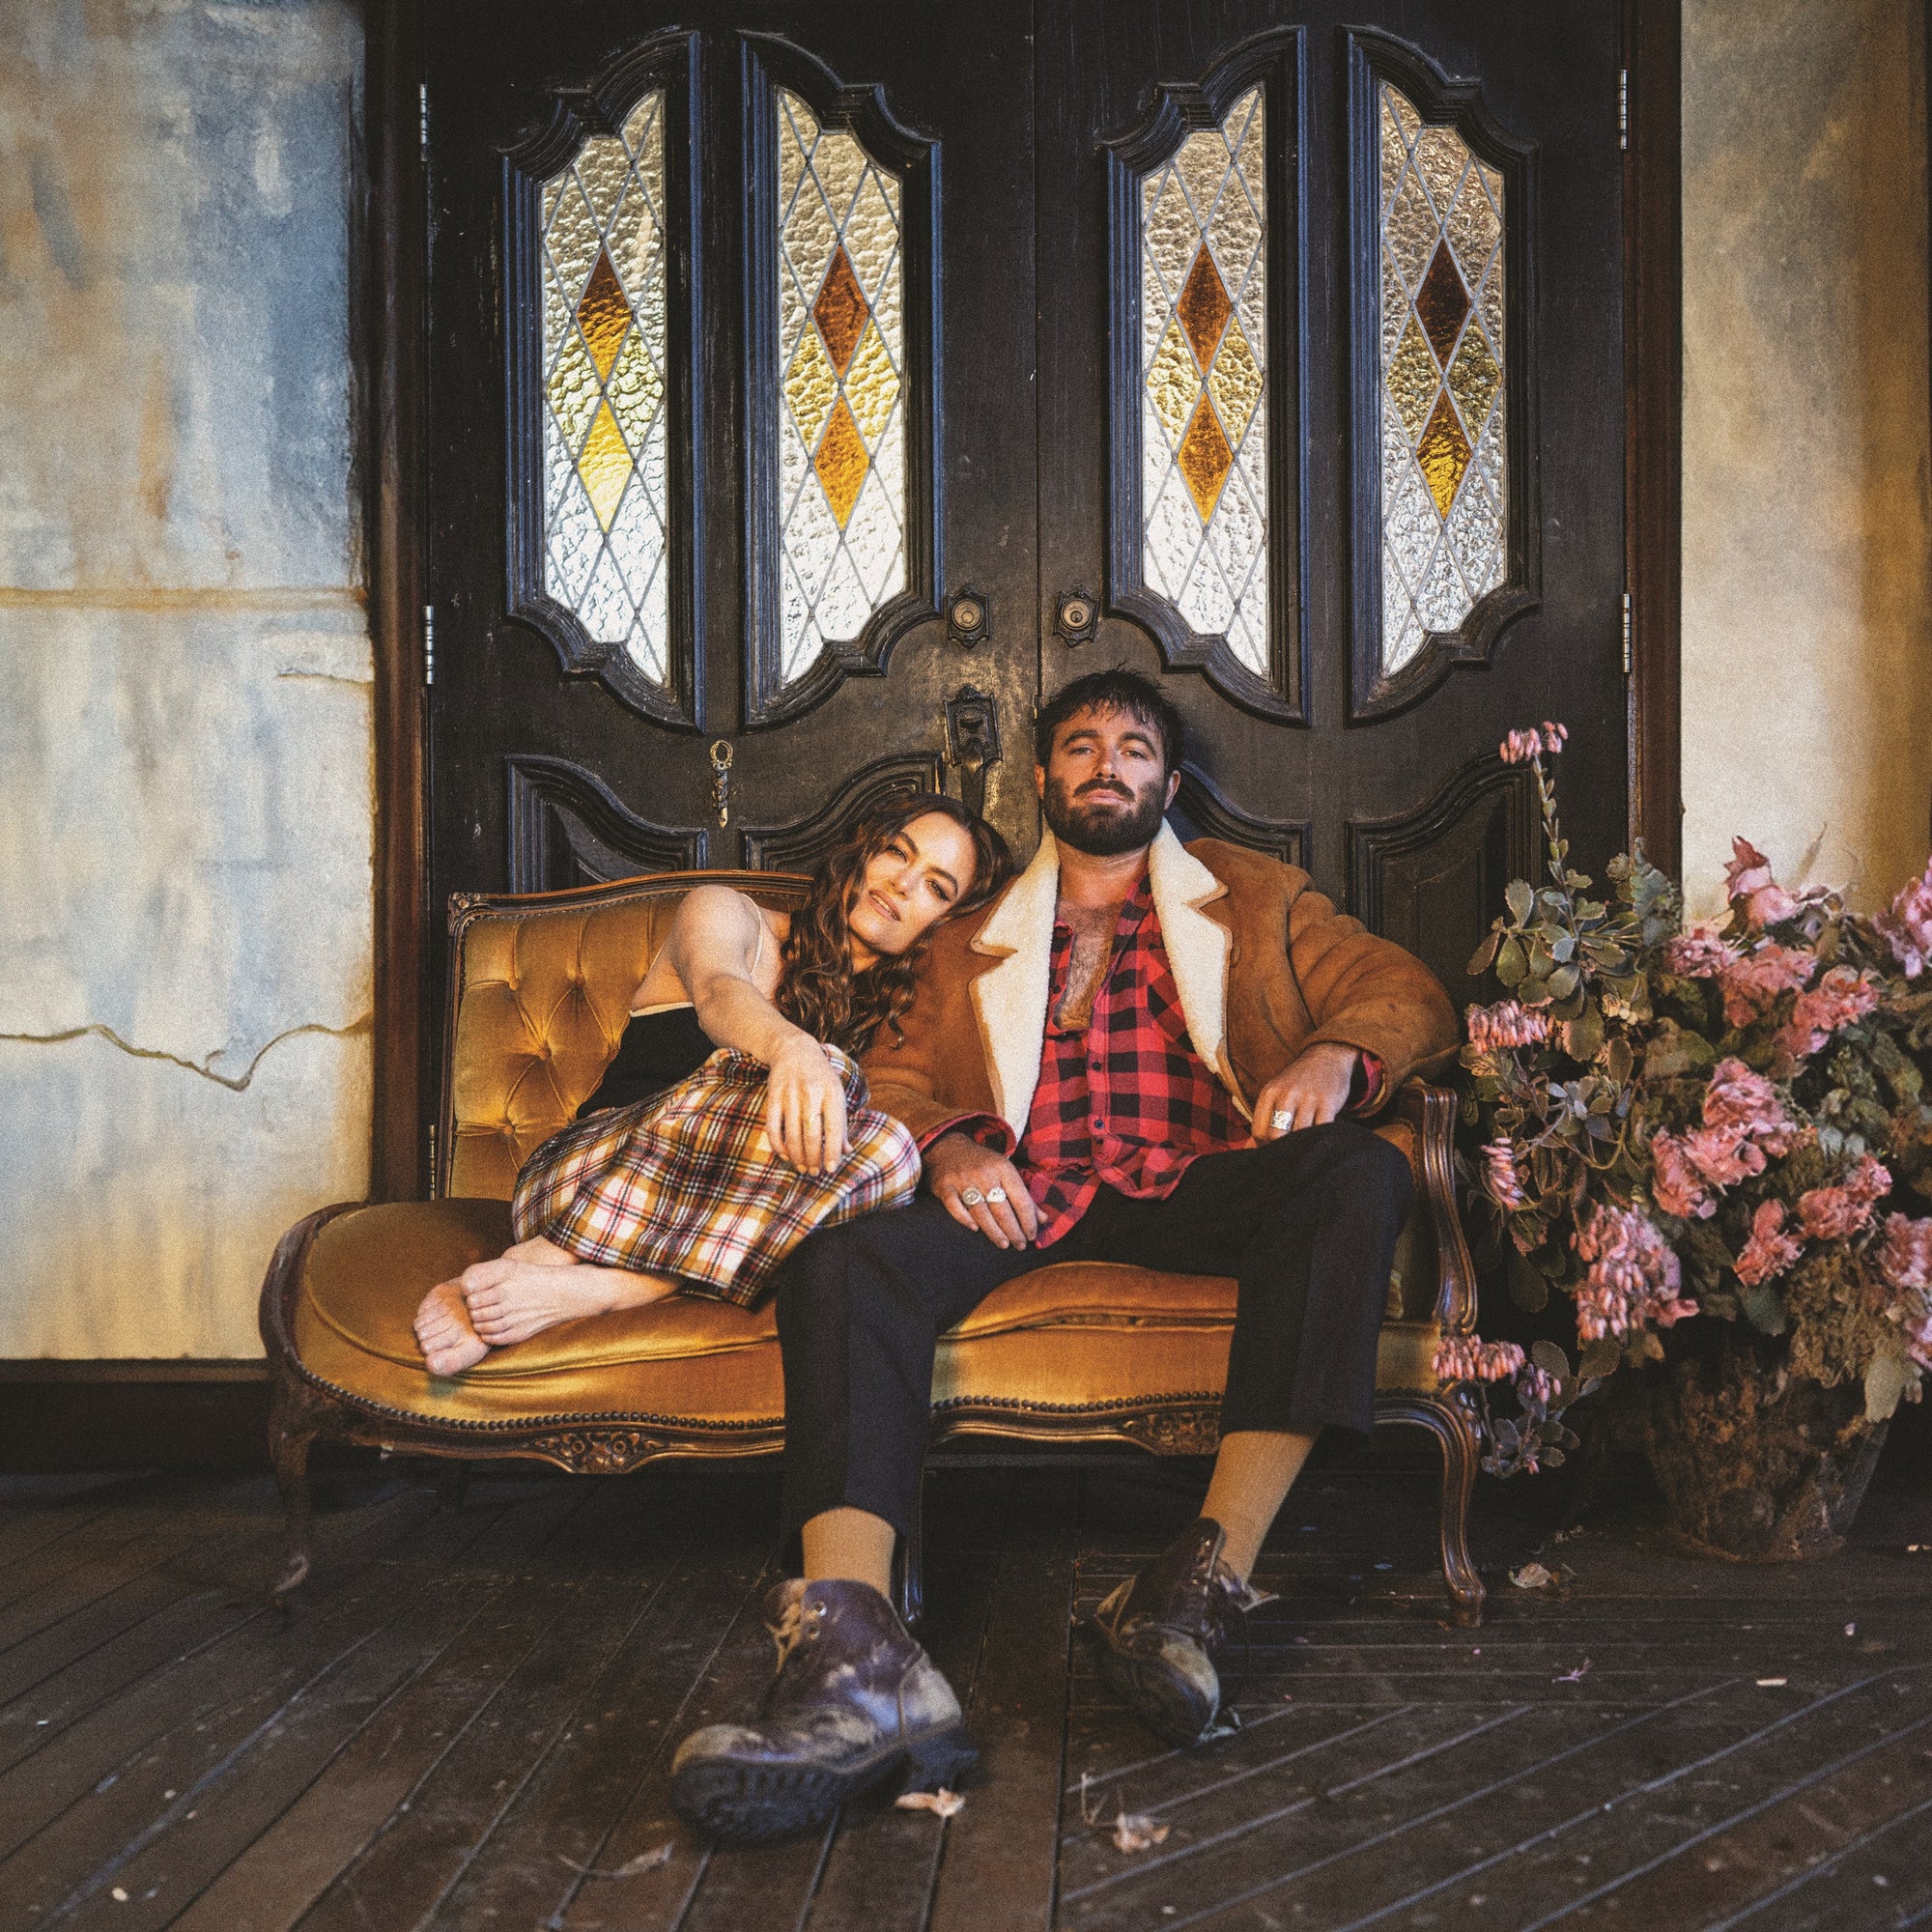 Angus & Julia Stone's 'Cape Forestier' is A Serene Voyage Home For The Australian Folk Duo